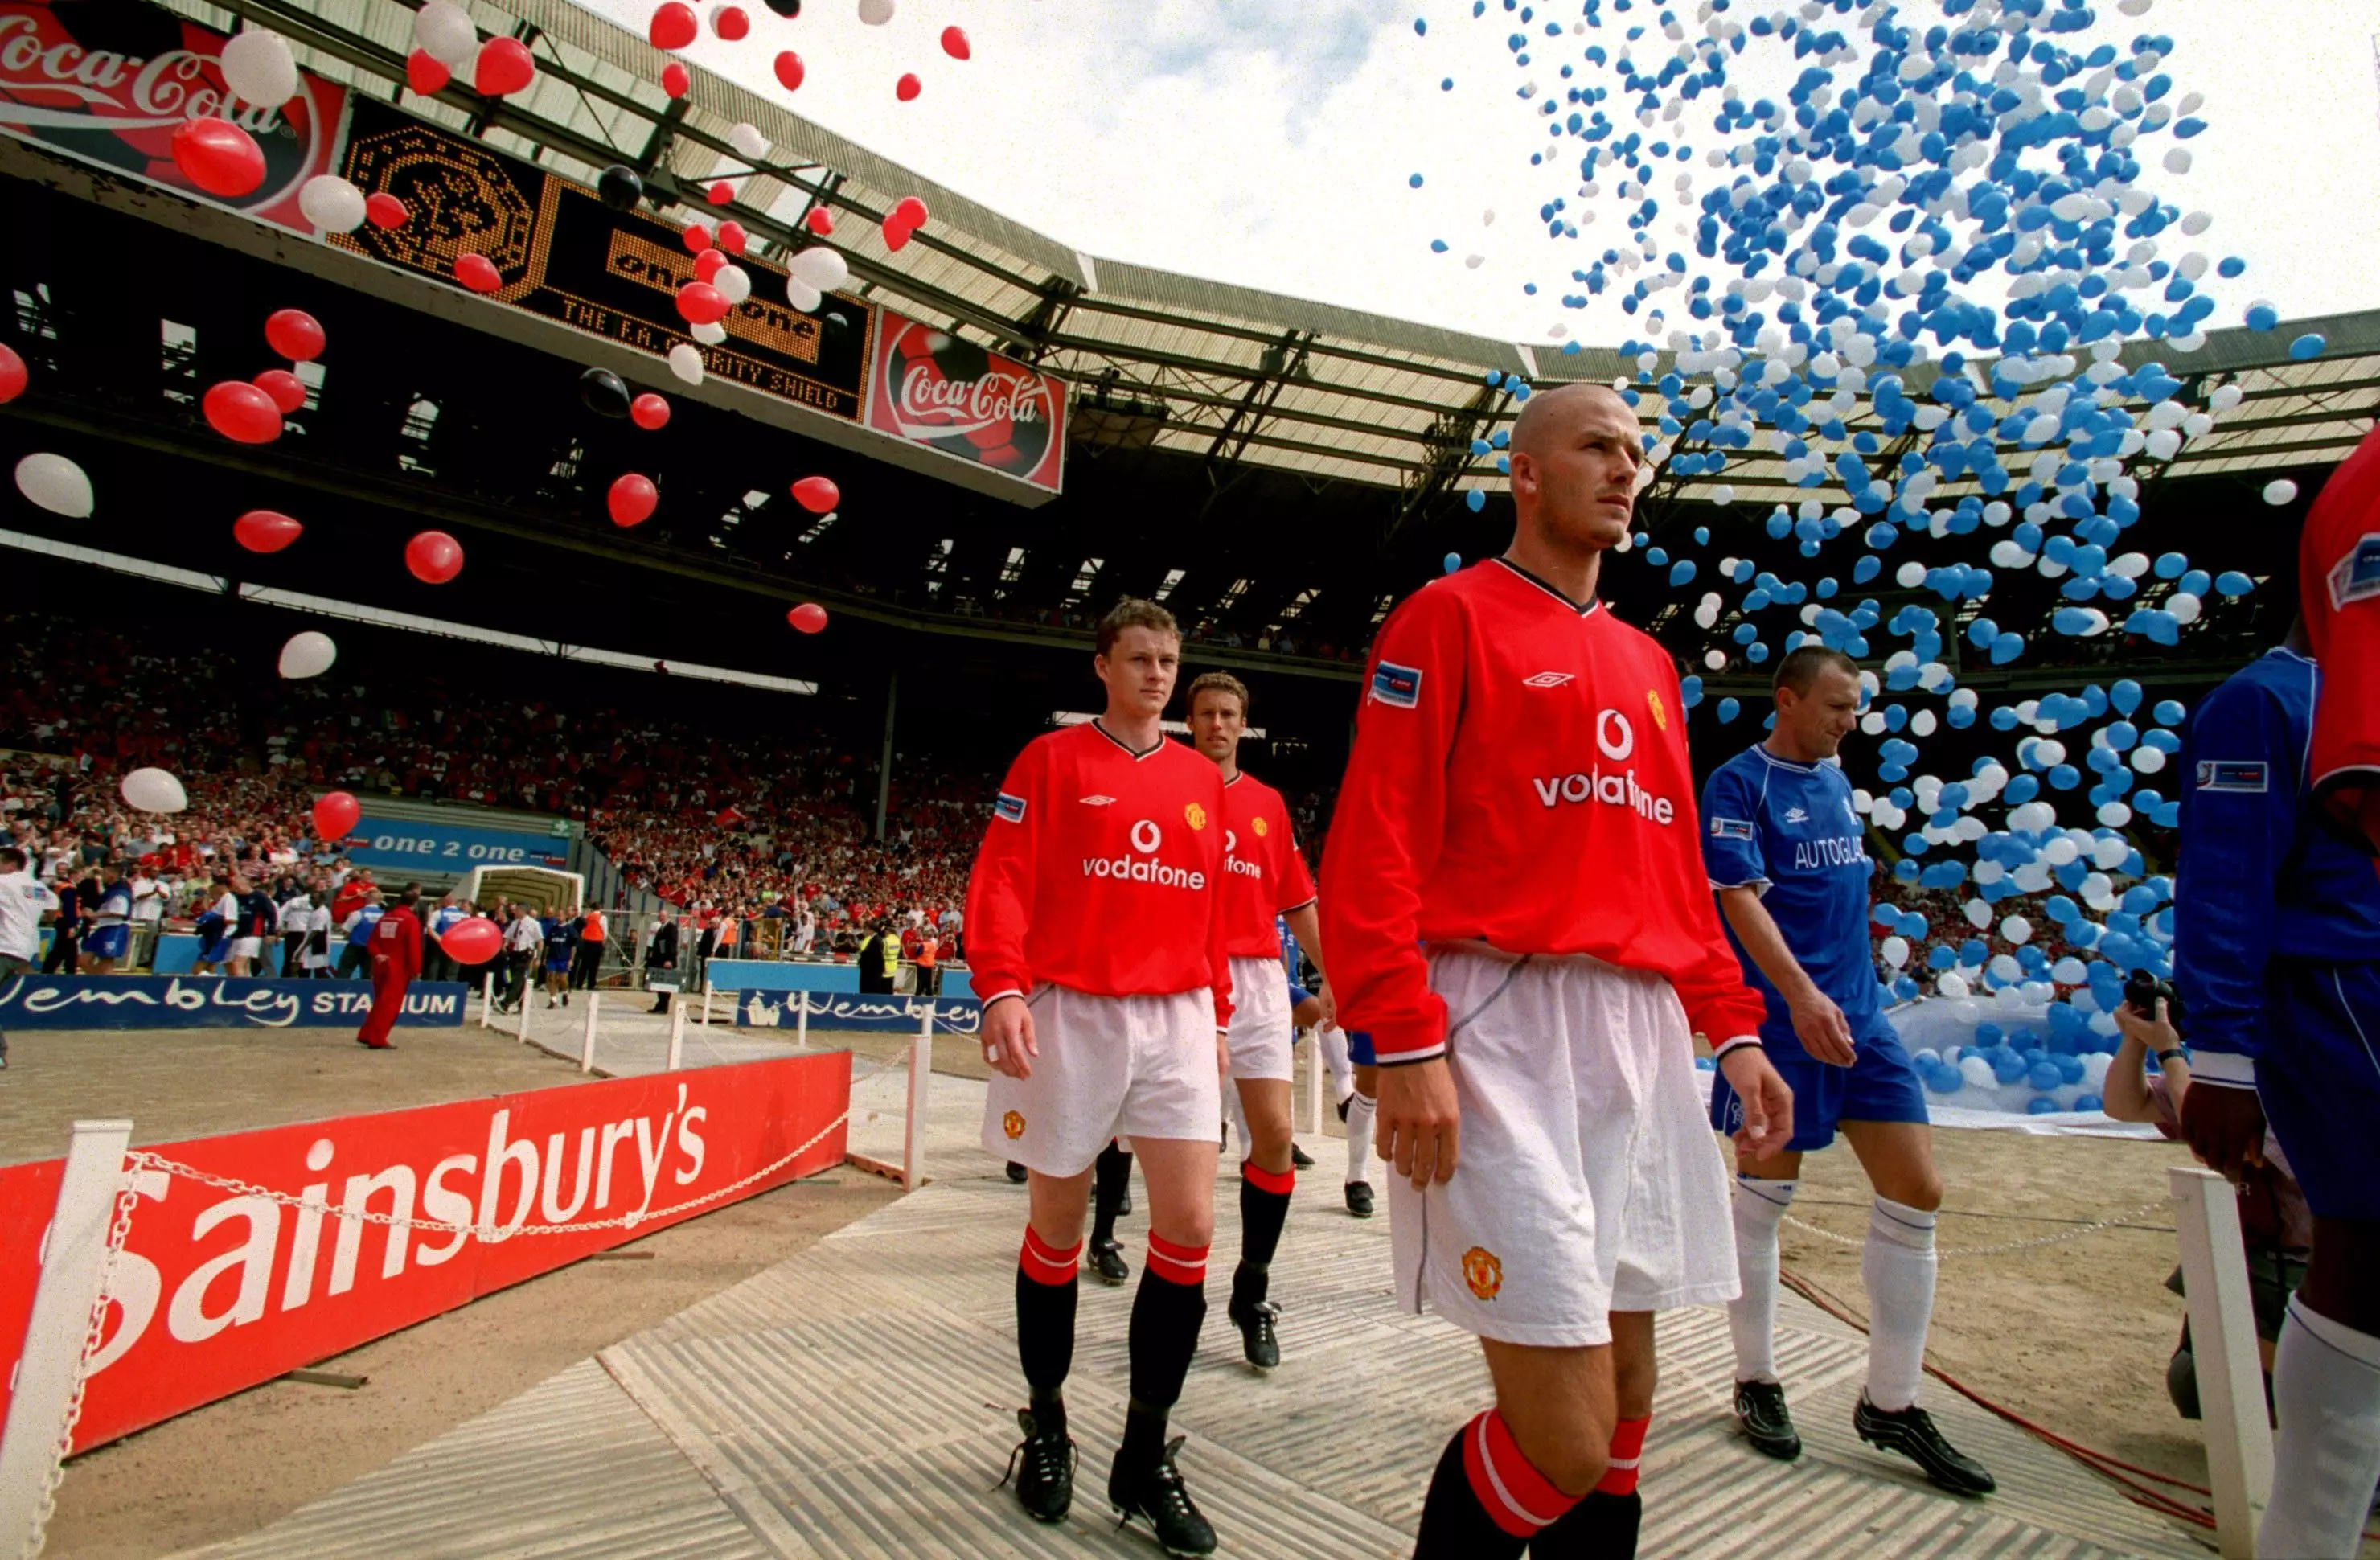 Chelsea and Manchester United players take to the field at Wemble in 2000, including David Beckham and his recently shaved head. Image credit: PA